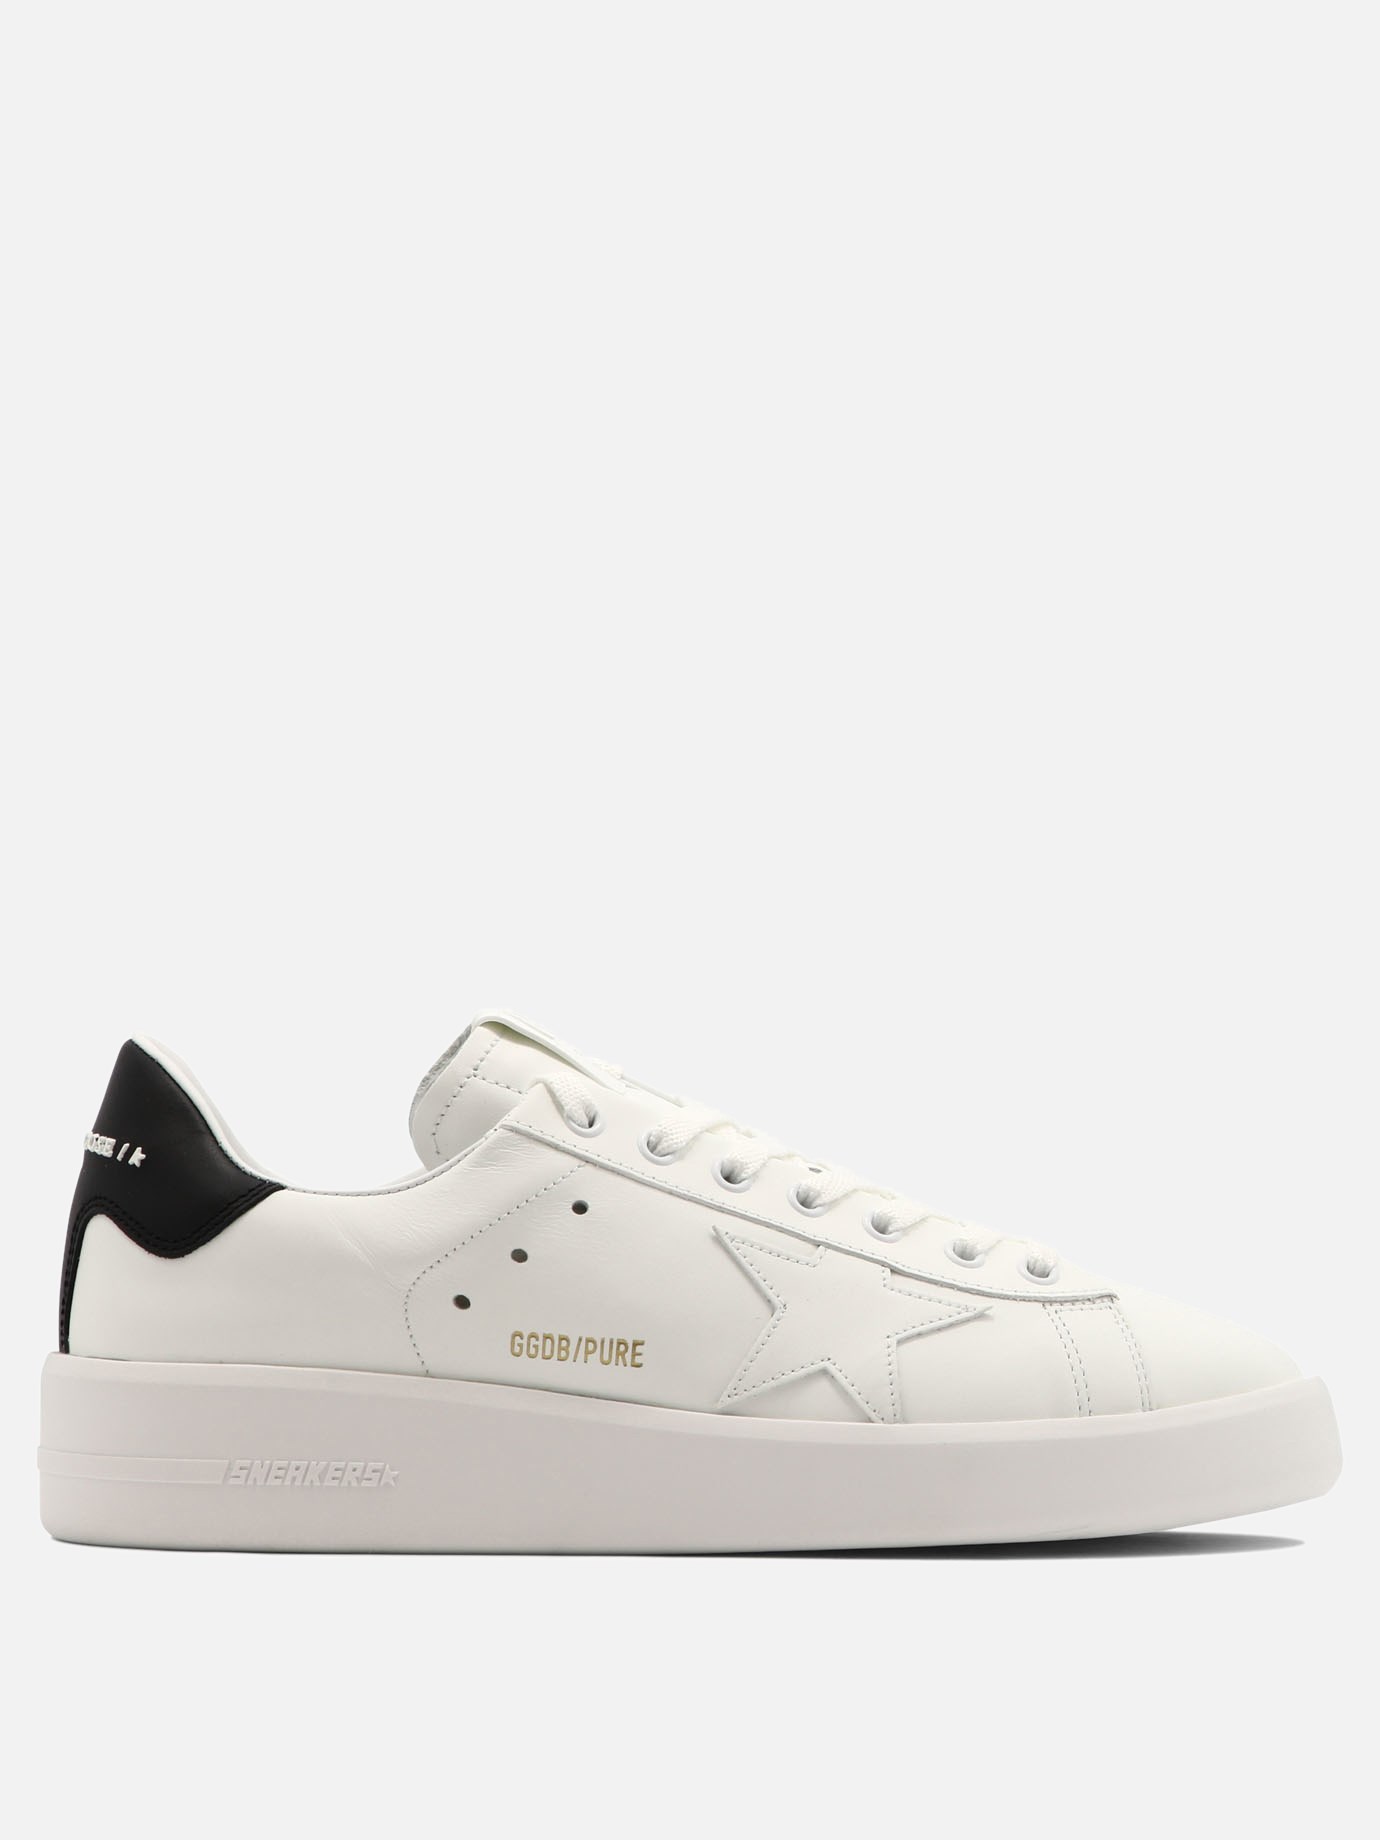 Sneaker  Pure New  by Golden Goose